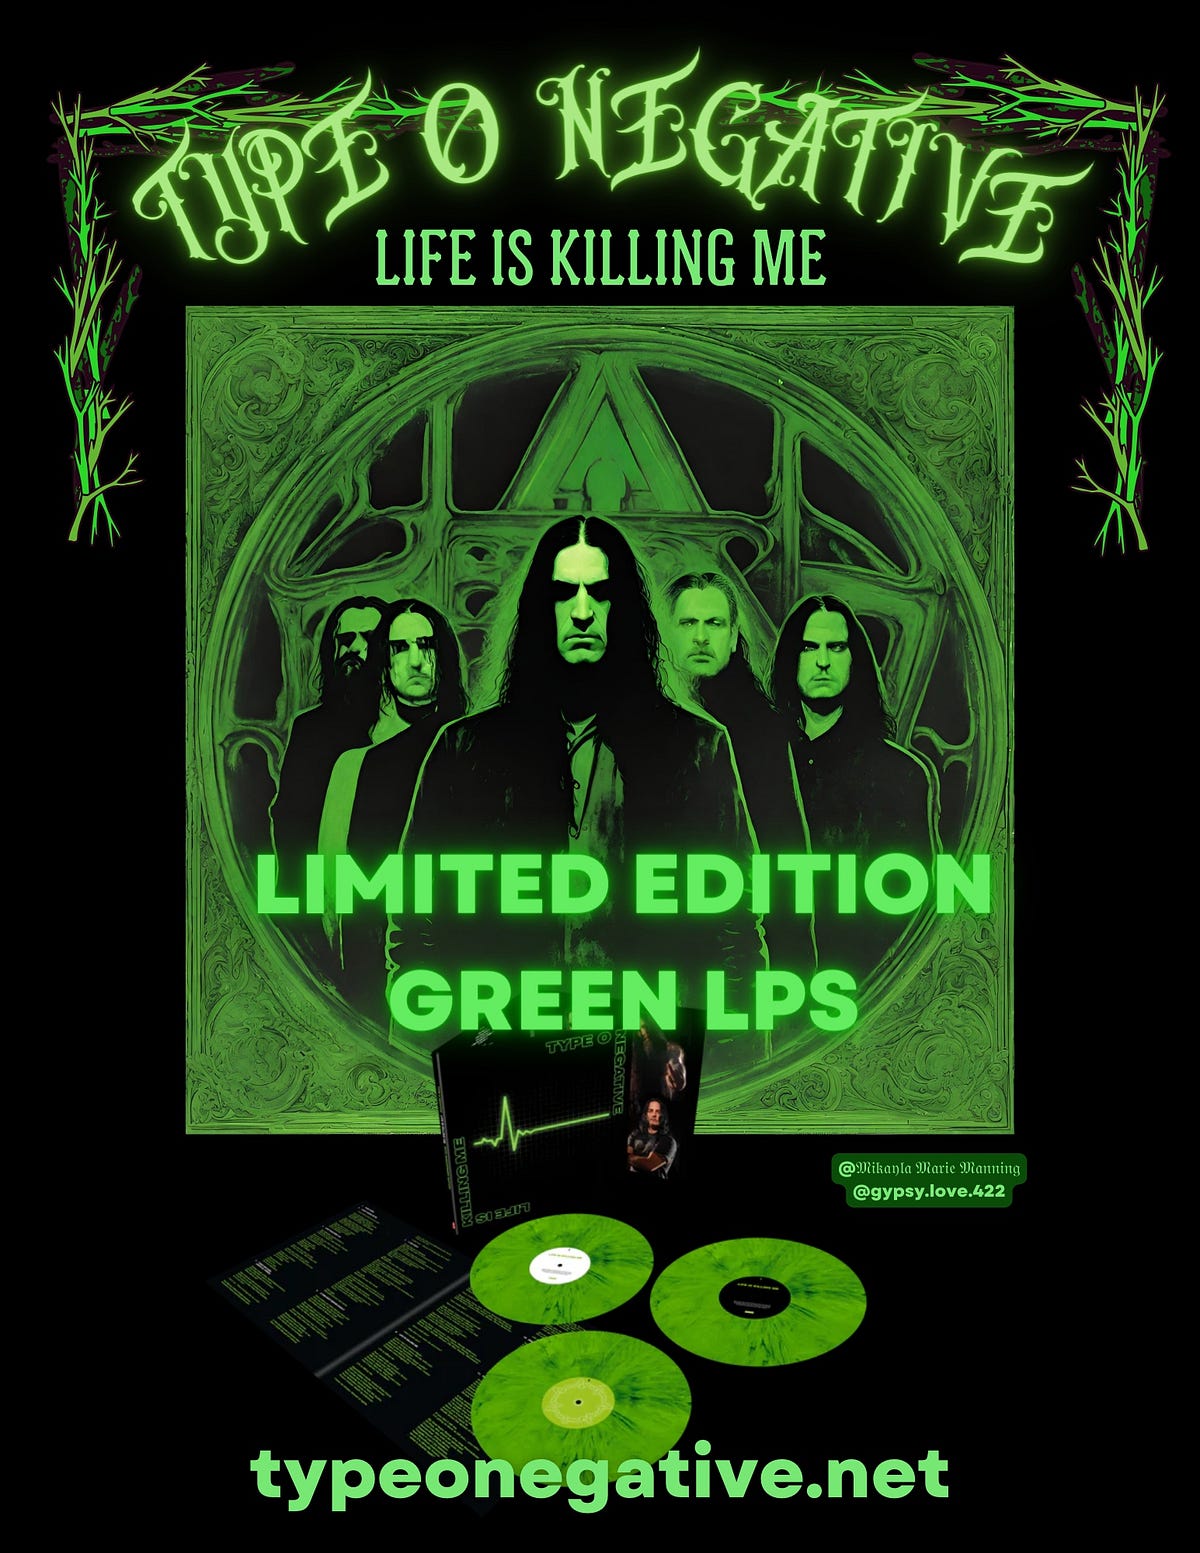 Type O Negative Releases Their First Vinyl for “Life Is Killing Me